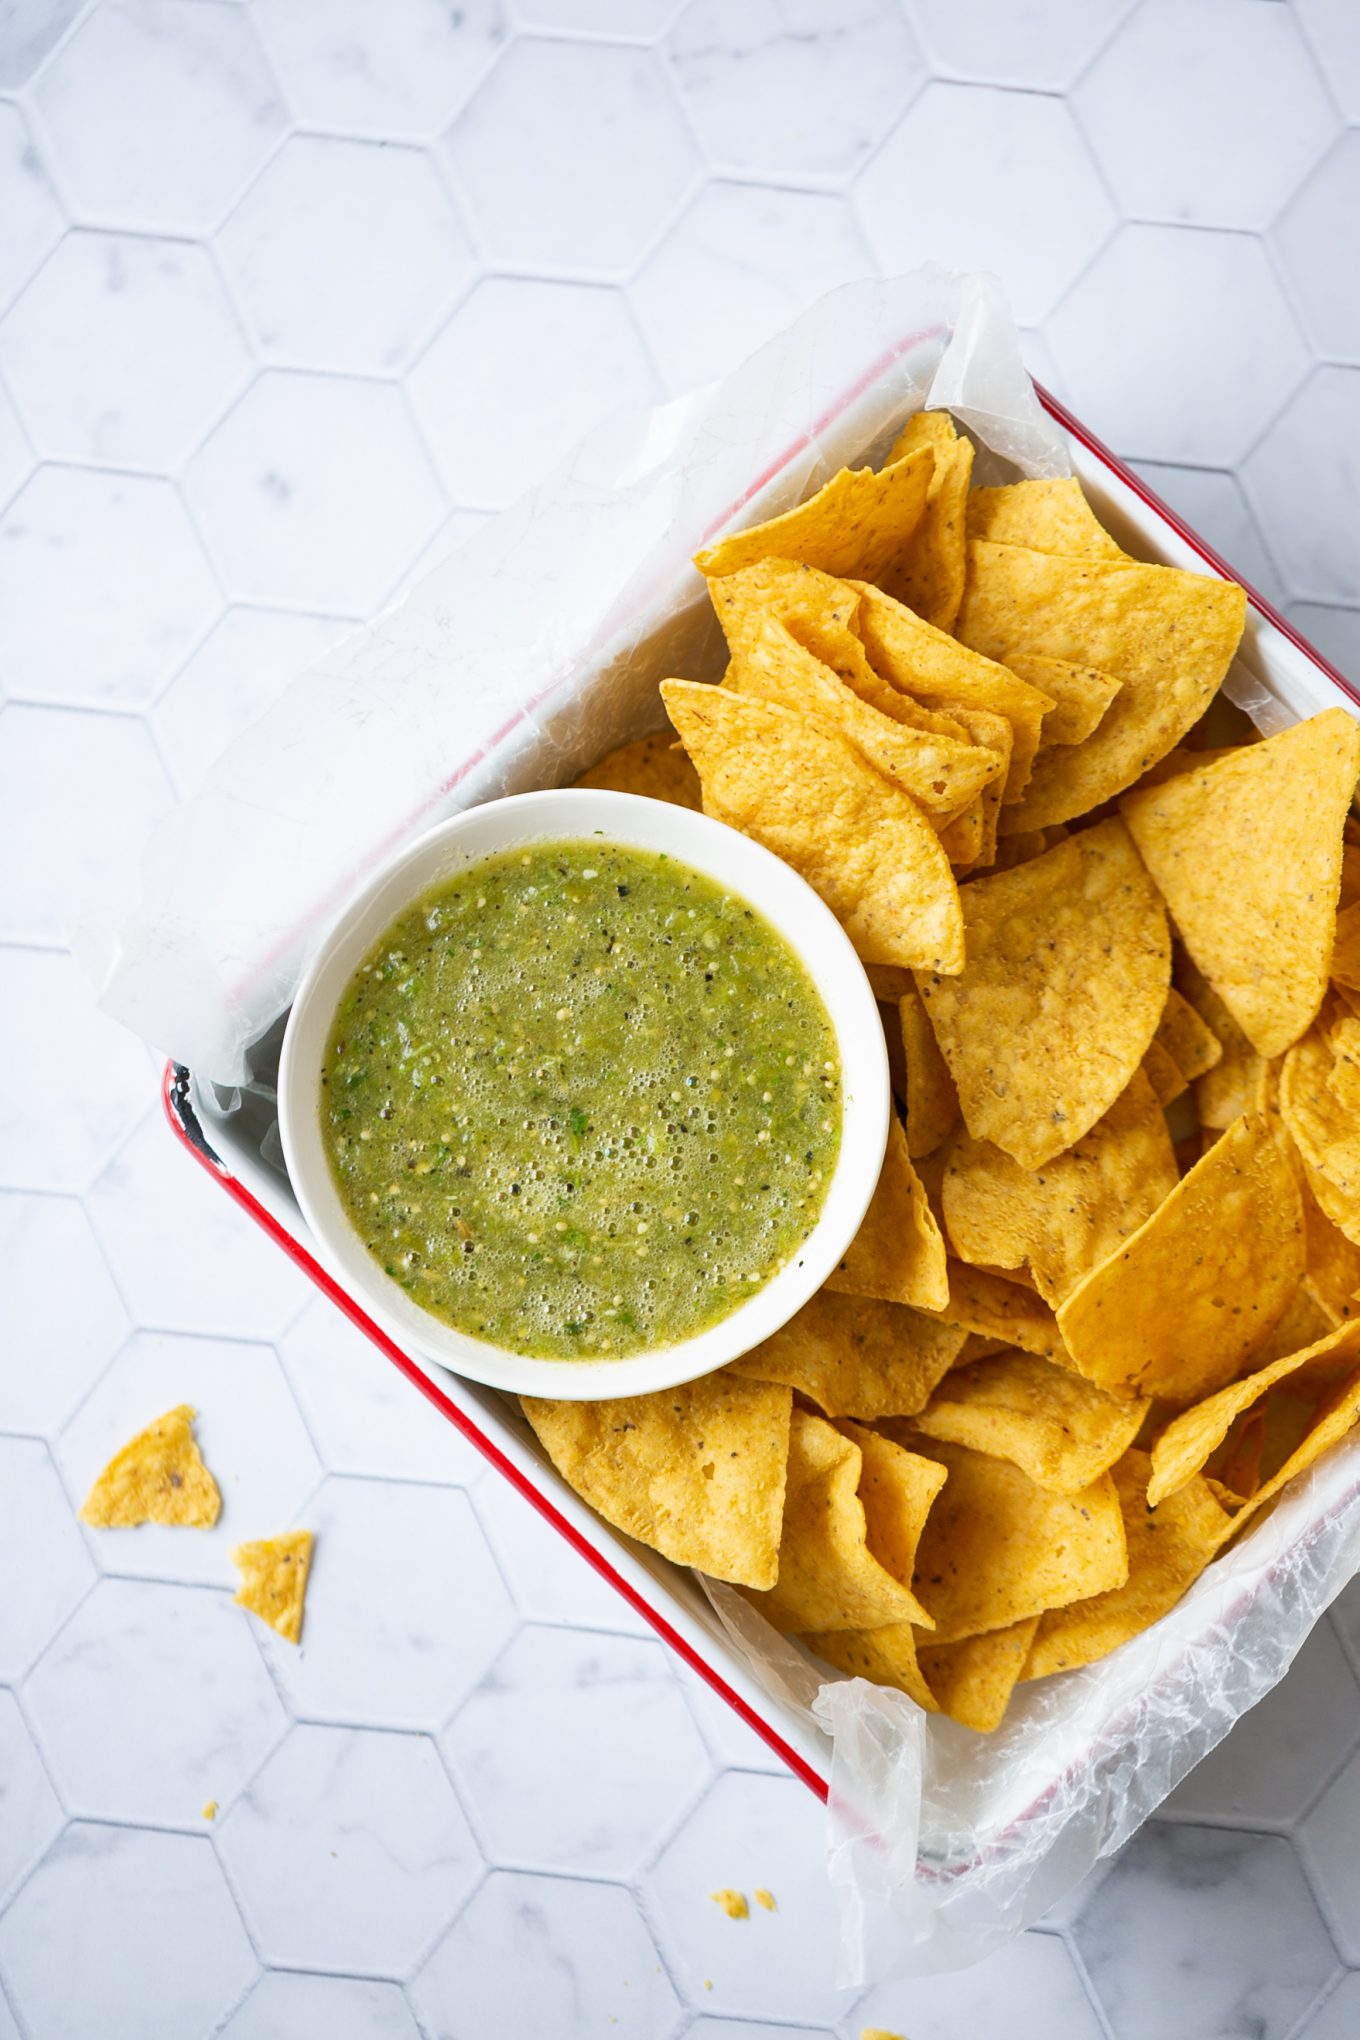 A tray of tortilla chips with authentic Mexican salsa verde and guacamole.